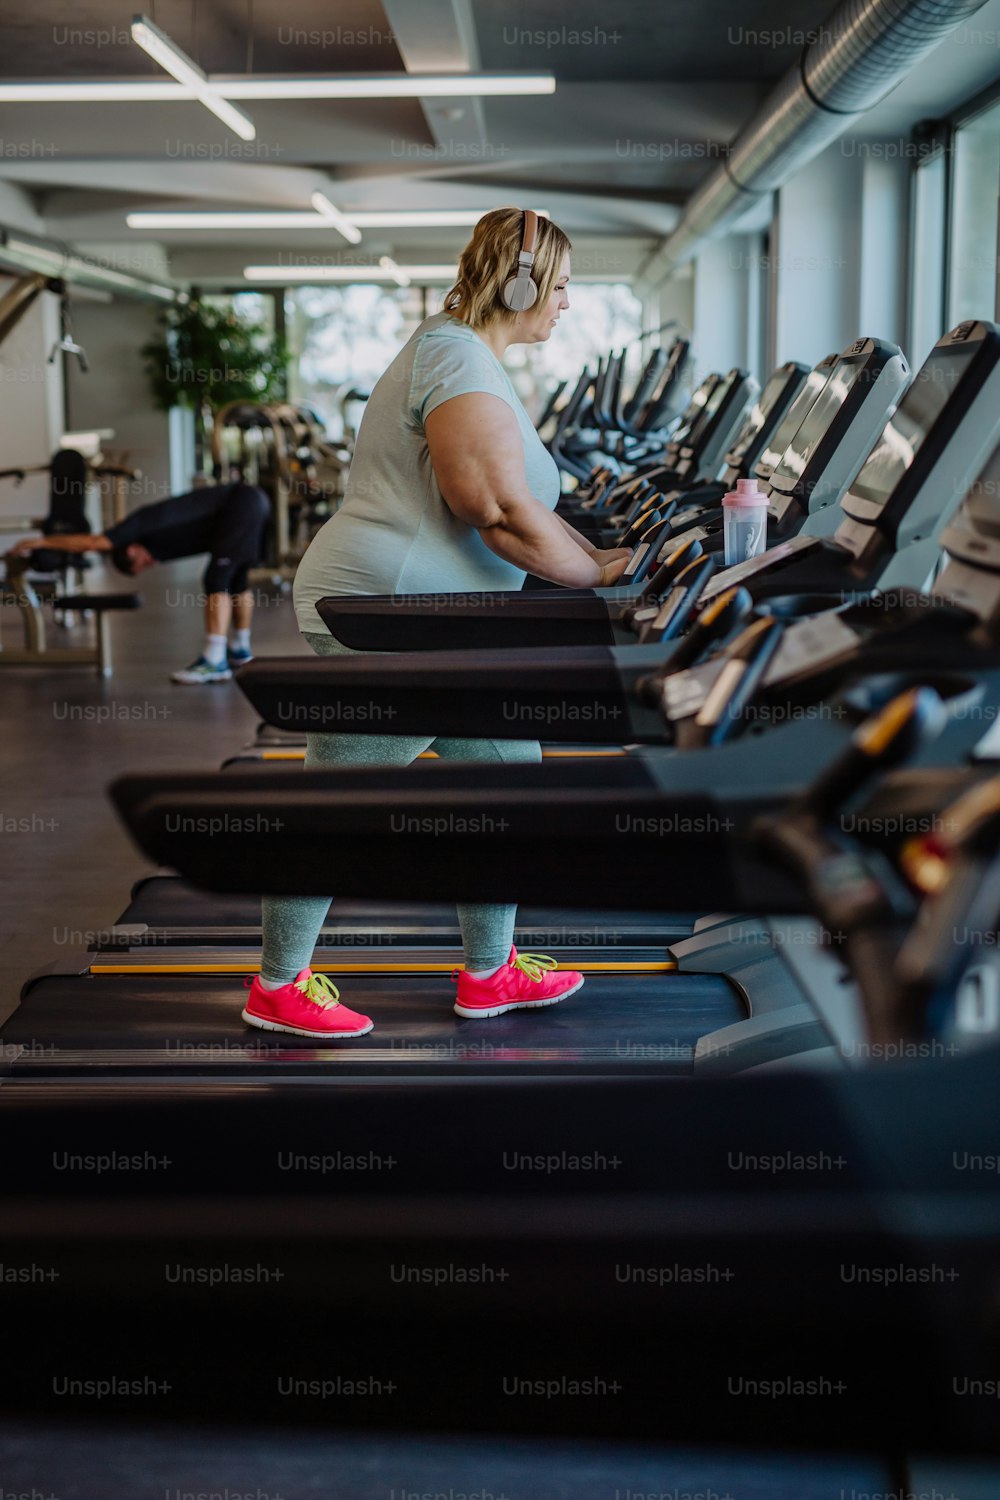 Mid adult overweight woman with headphones running on treadmill in gym